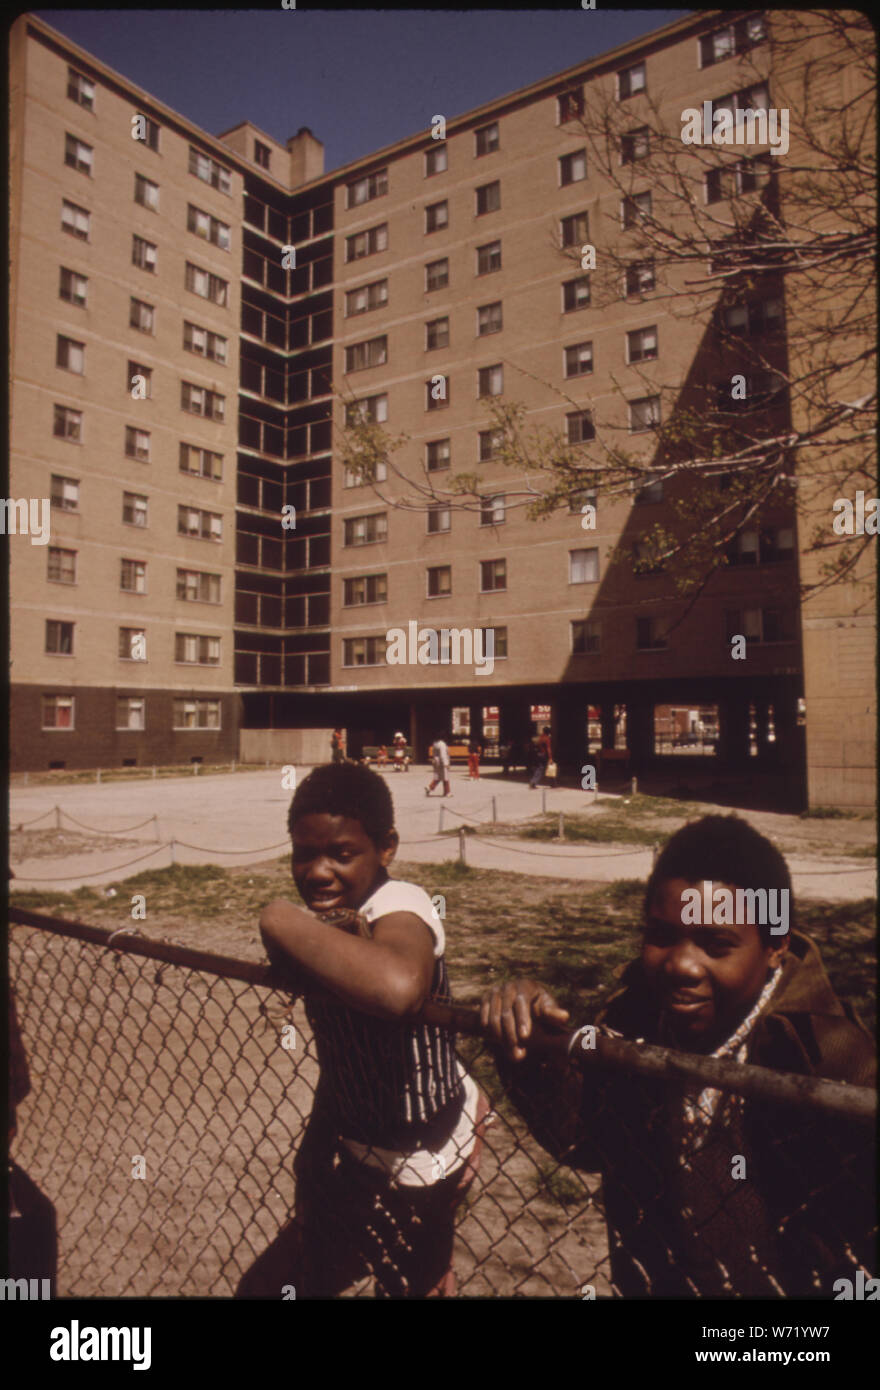 BLACK YOUNGSTERS OUTSIDE THE STATEWAY GARDENS HIGHRISE HOUSING PROJECT ON CHICAGO'S SOUTH SIDE. THE COMPLEX HAS EIGHT BUILDINGS WITH 1,633 TWO AND THREE BEDROOM APARTMENTS HOUSING 6,825 PERSONS. THEY WERE BUILT UNDER THE U.S. HOUSING ACTS OF 1949 AND 1968 THEY ARE MANAGED BY THE CHICAGO HOUSING AUTHORITY WHICH IS RESPONSIBLE FOR 41,500 PUBLIC HOUSING DWELLINGS. CHICAGO'S MIDDLE CLASS BLACKS LIVE ON THE SOUTH SIDE, WEST SIDE AND NEAR NORTH SIDE IN HIGHRISE APARTMENTS Stock Photo